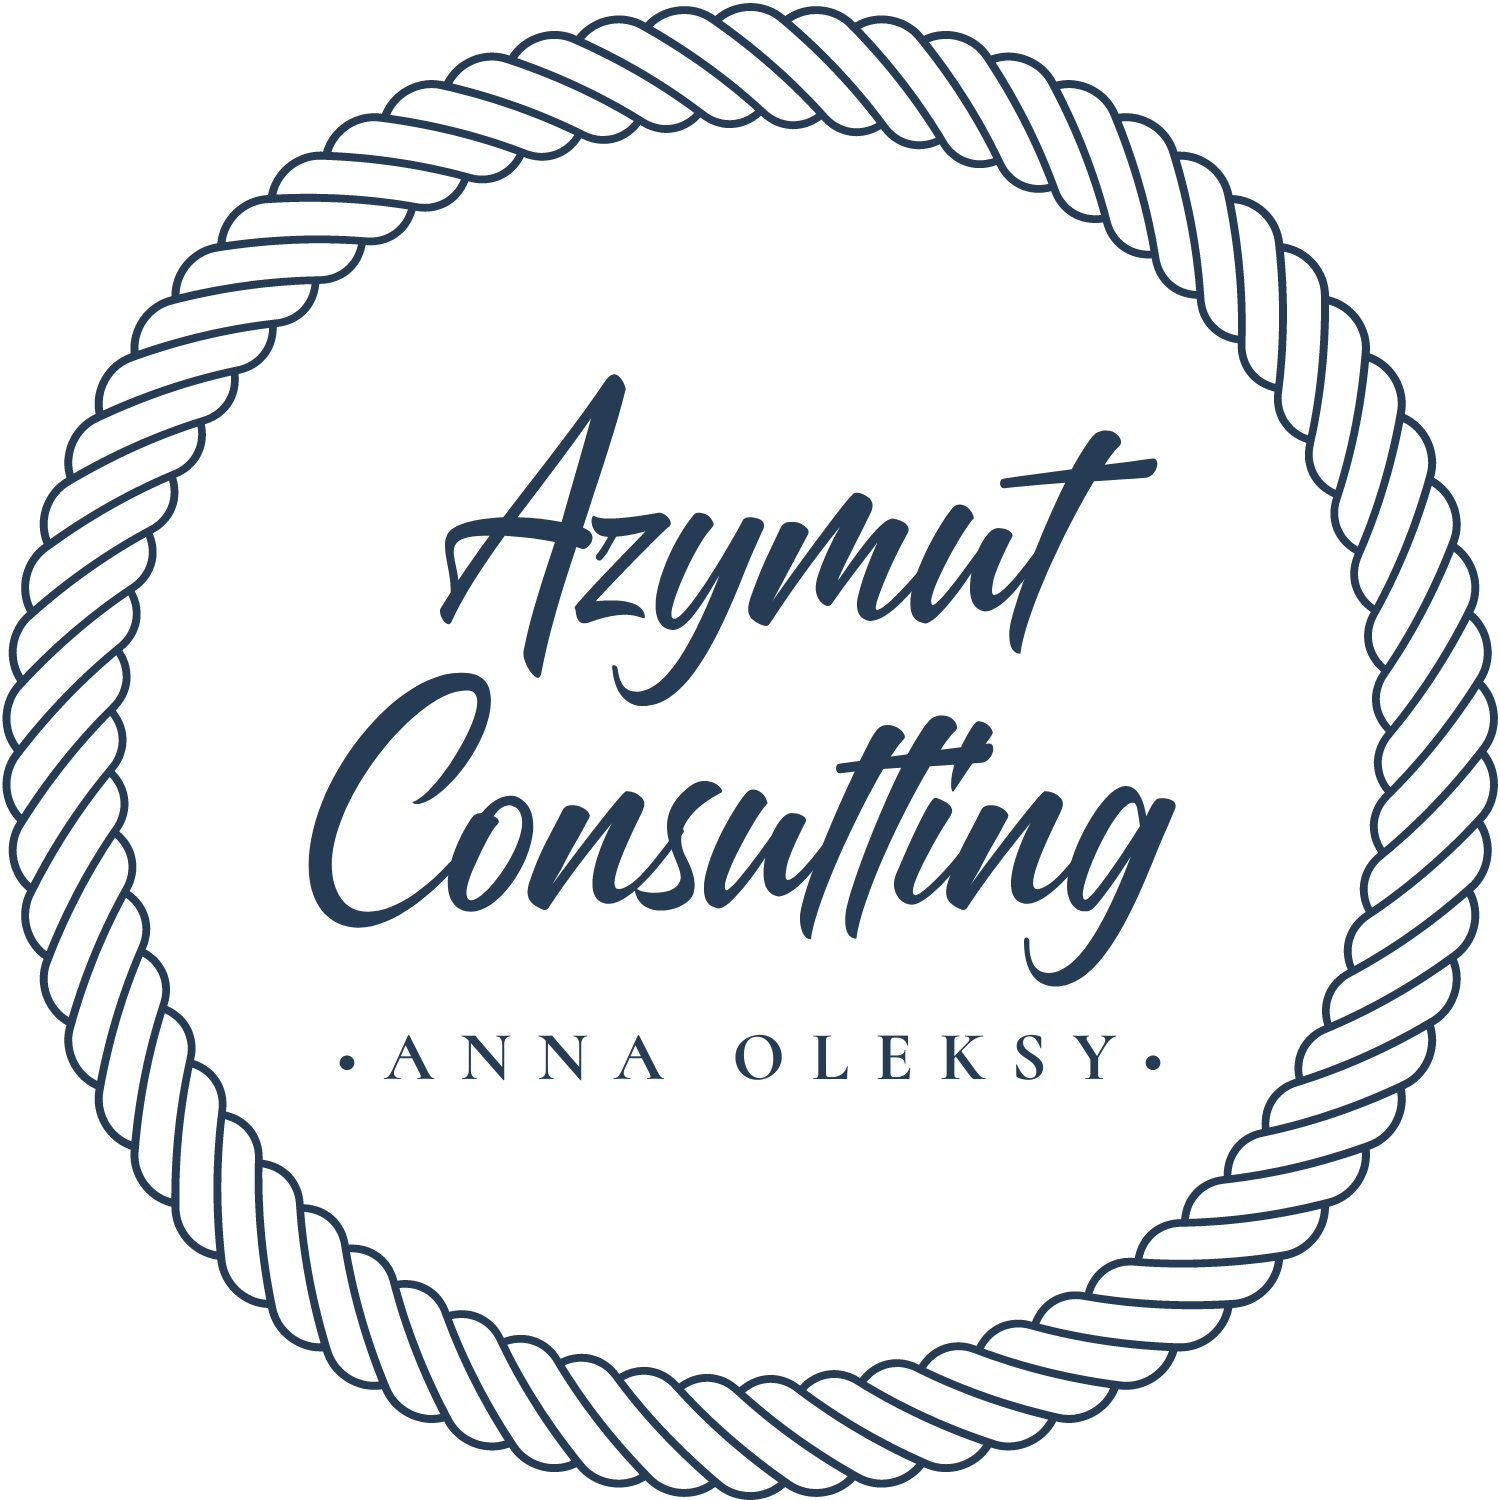 Azymut Consulting